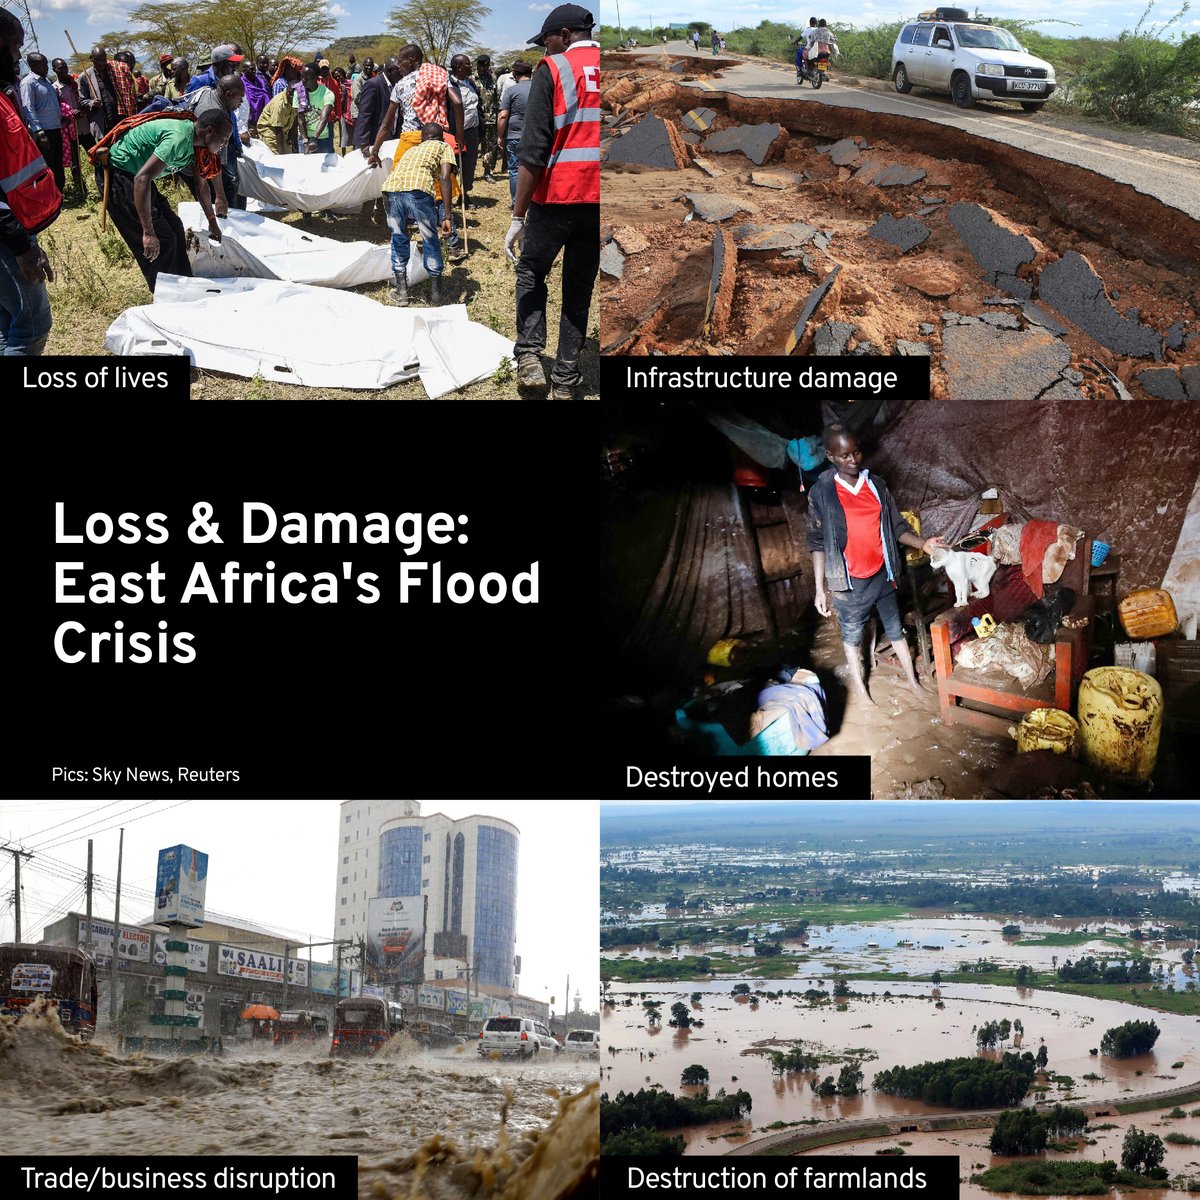 Loss and Damage: East Africa's Flood Crisis Here is what has been lost during the #KenyaFloods so far: ✅Loss of lives ✅Infrastructure damage ✅Destroyed homes ✅Destruction of farmlands ✅Trade/business disruption It is time to prioritize early-warning systems #KenyaNews